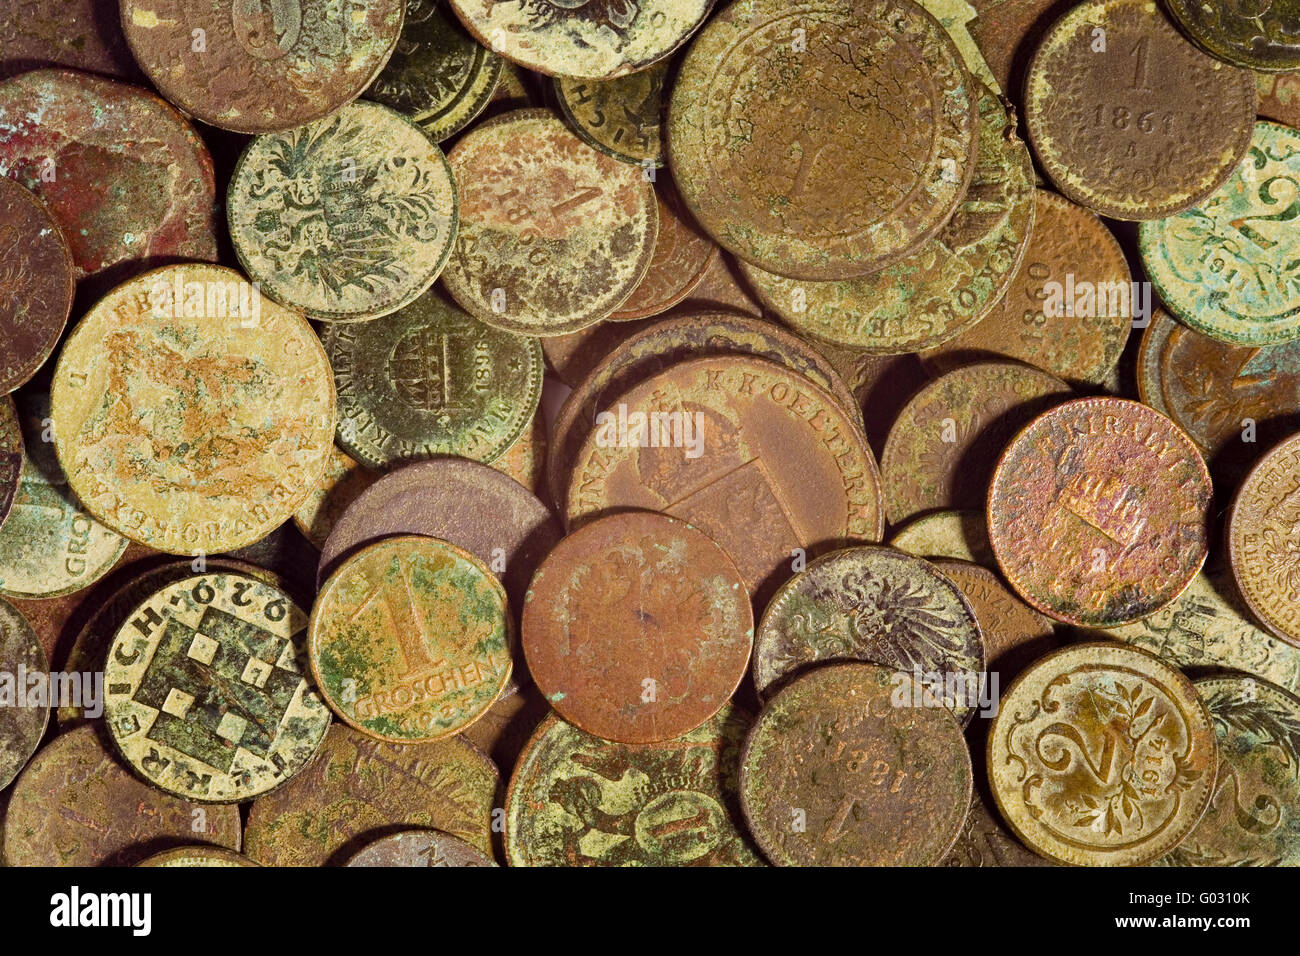 Old collections of coins Stock Photo